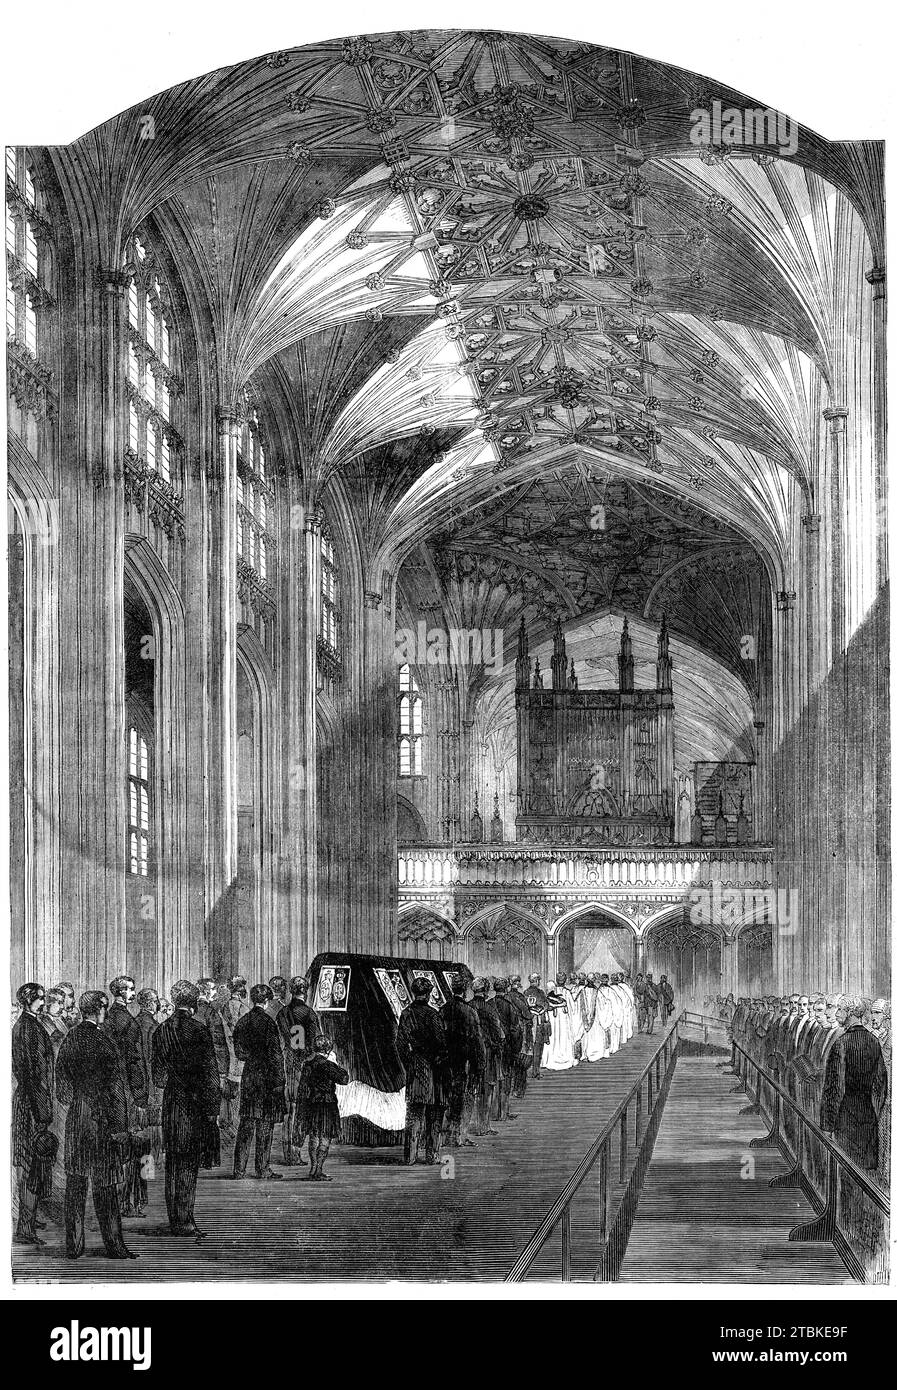 The Funeral of His Late Royal Highness the Prince Consort:  the Funeral Procession in the nave of St. George's Chapel, Windsor, 1861. 'By the express desire of his Royal Highness the funeral was of the plainest and most private character...A gradually rising platform led from the Castle-yard into the nave [of St George's Chapel], along the sides and centre of which a stage had been erected...This stage...and the floor of the chapel itself, were covered with black cloth; a simple white line marking the course of the bier from the west end of the nave to the entrance of the Royal vault...The pal Stock Photo